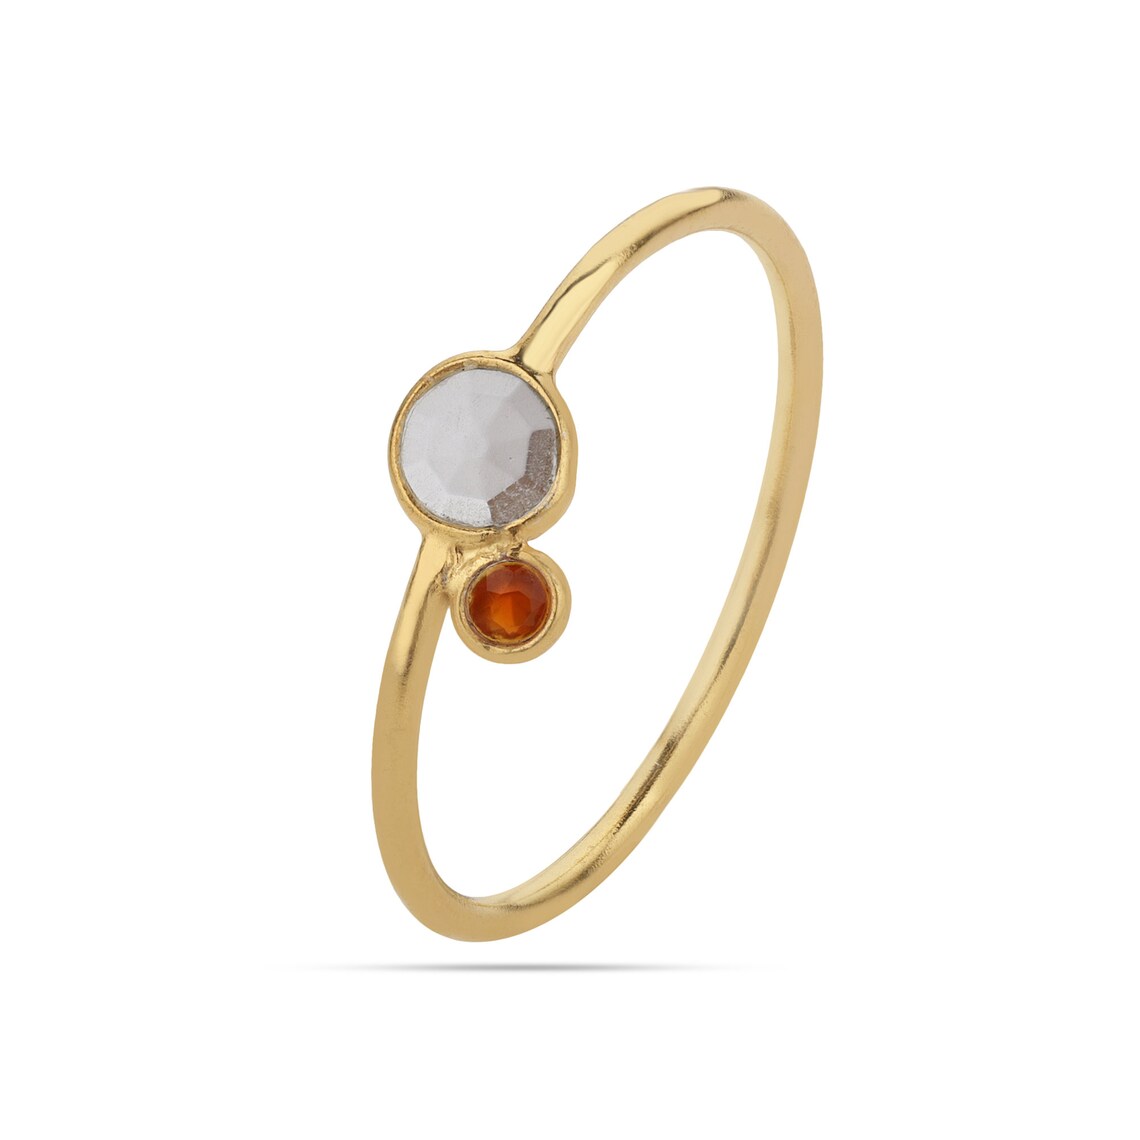 Crystal Carnelian Sterling Silver Ring, Tiny Crystal Ring, August Birthstone Ring, Carnelian Gemstone Gold Ring, White Crystal Ring